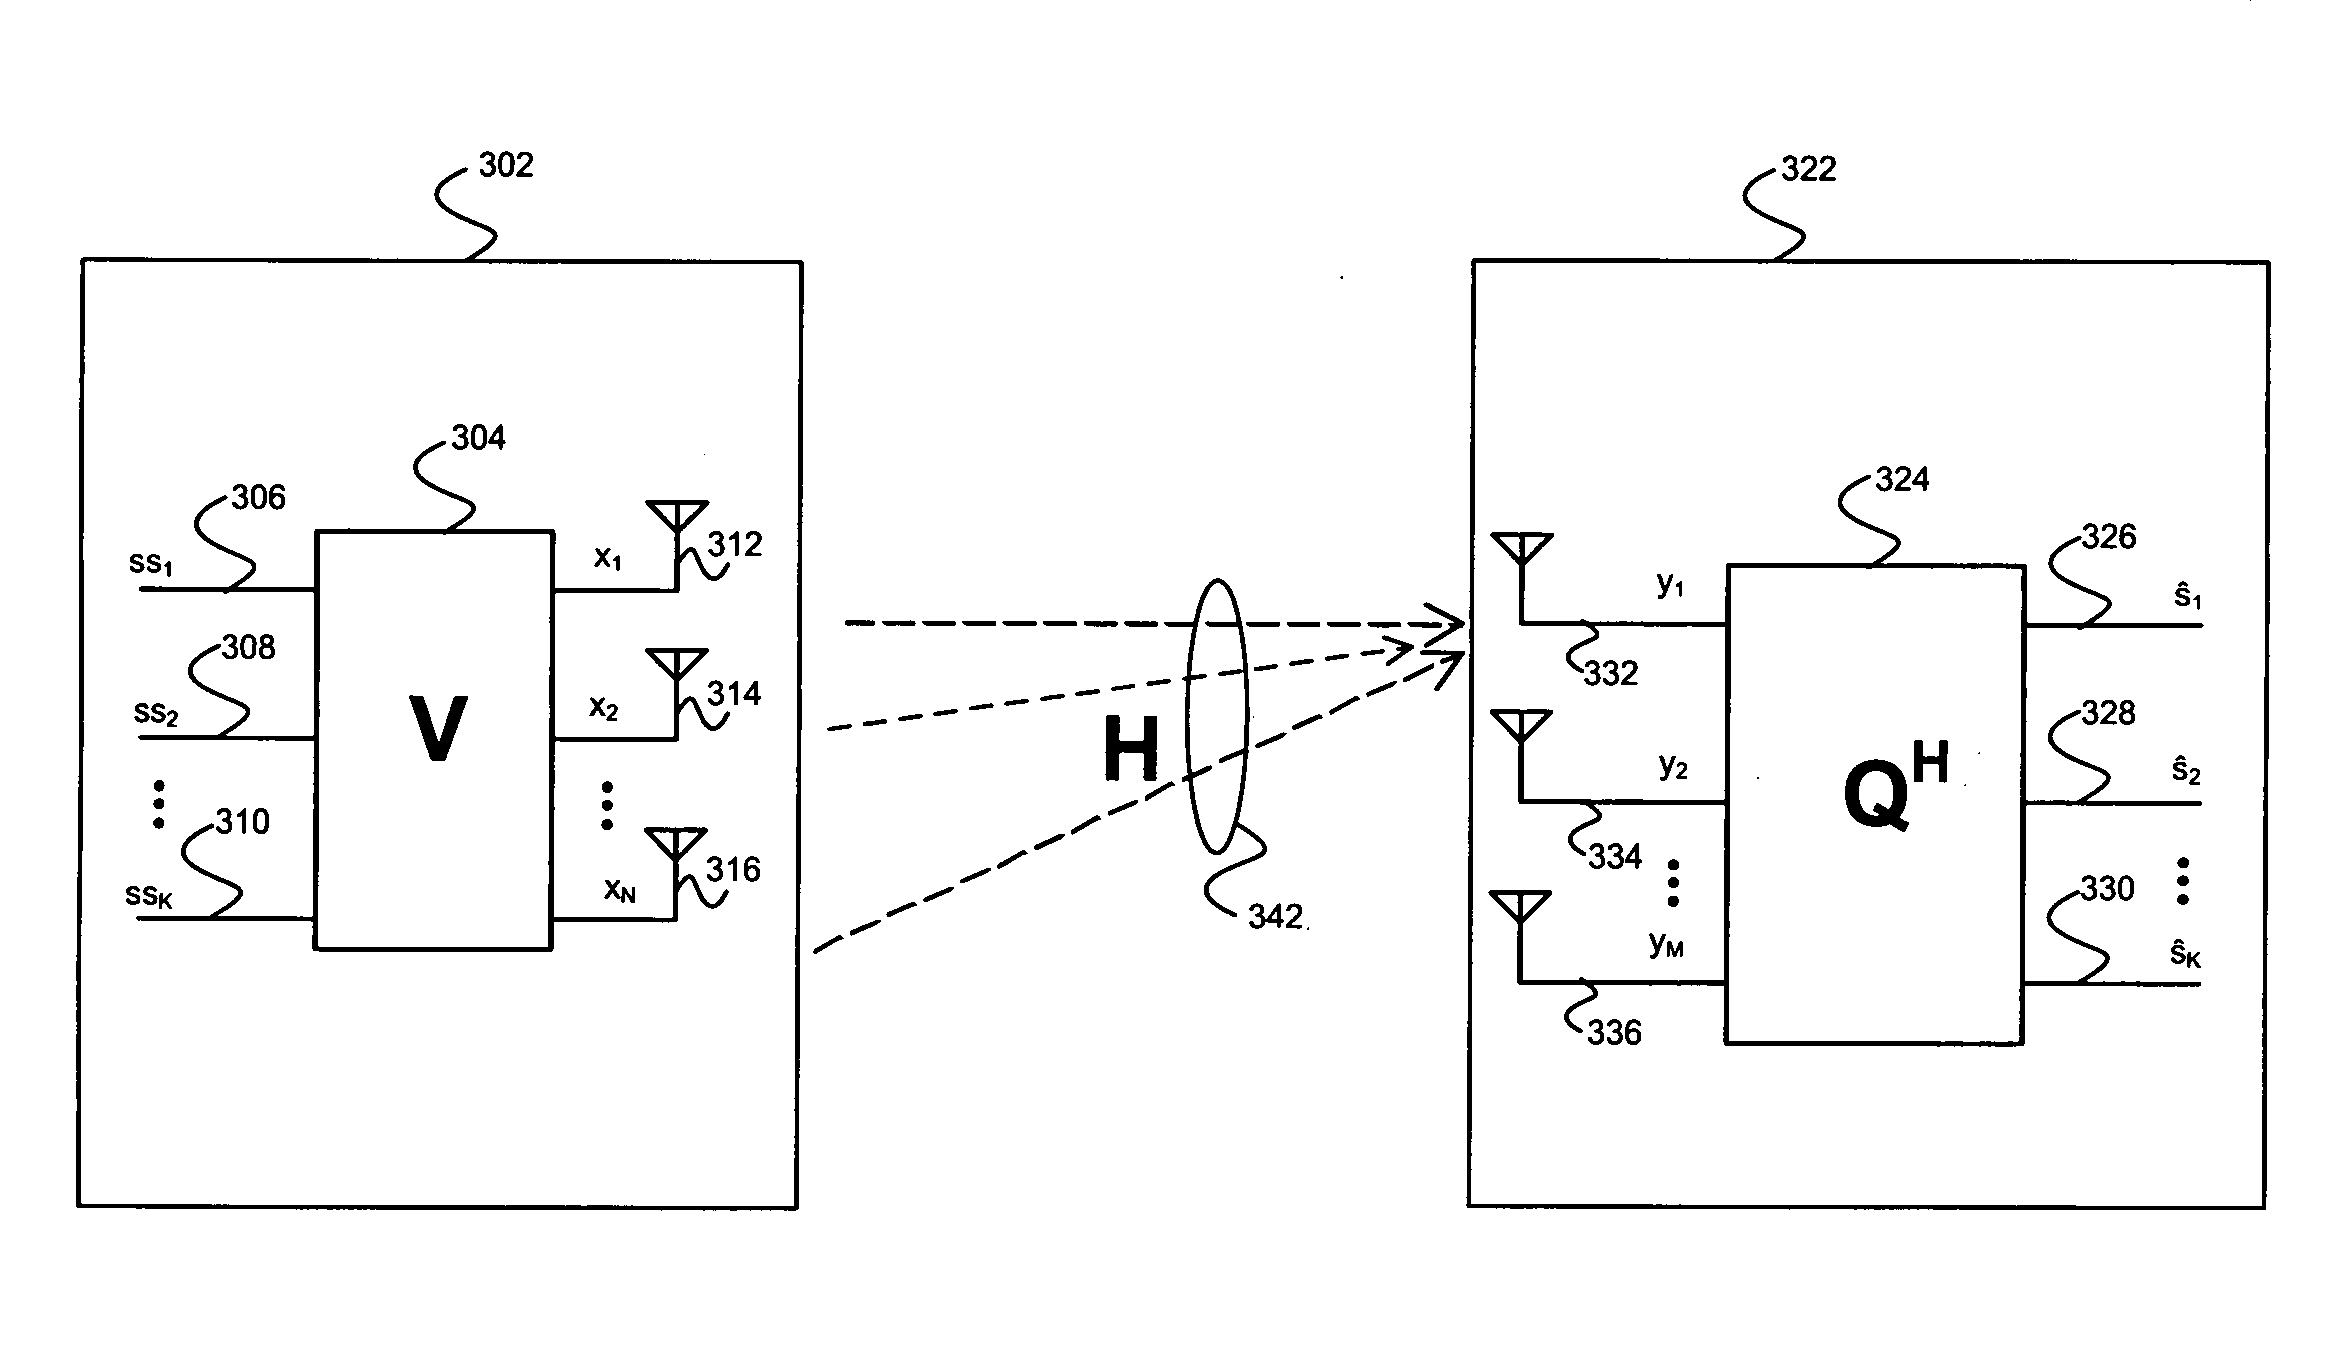 Method and system for transmitter beamforming for reduced complexity multiple input multiple output (MIMO) transceivers